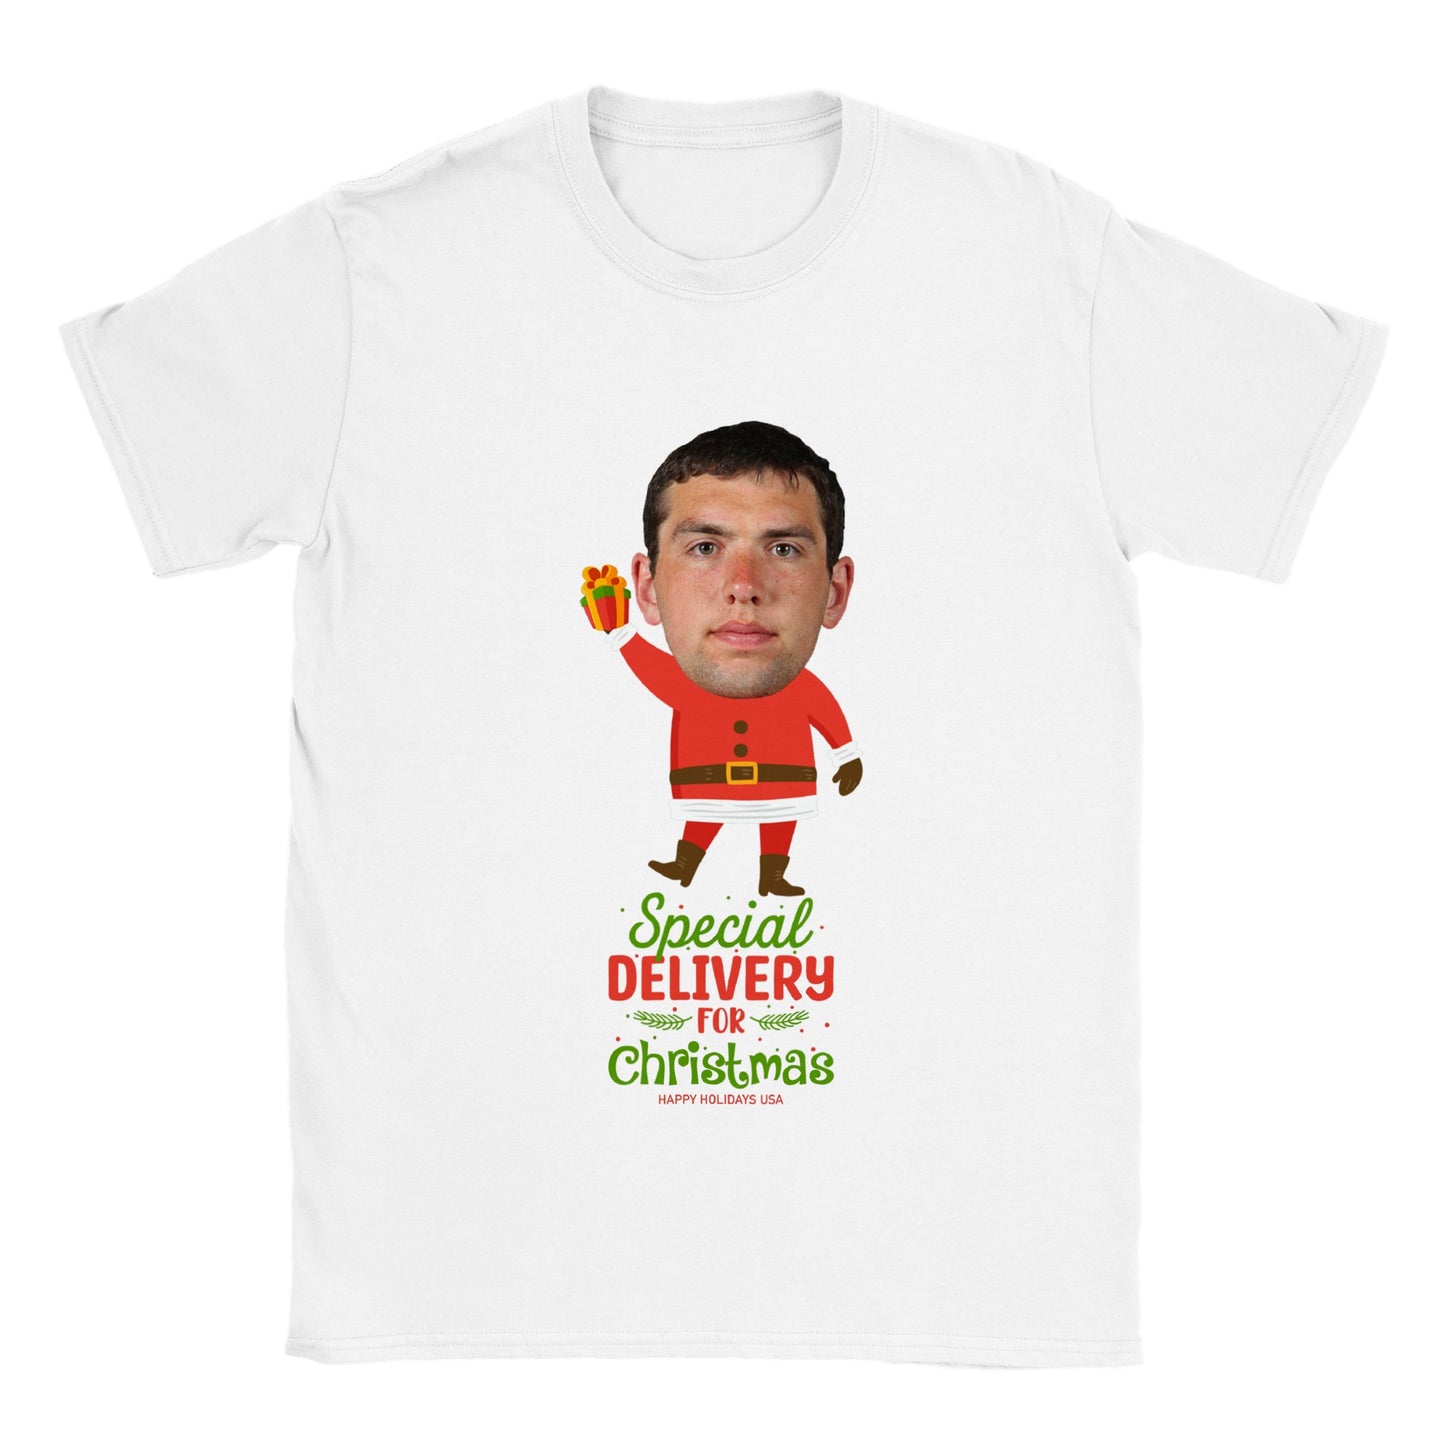 Special Delivery For Christmas - Christmas Tee